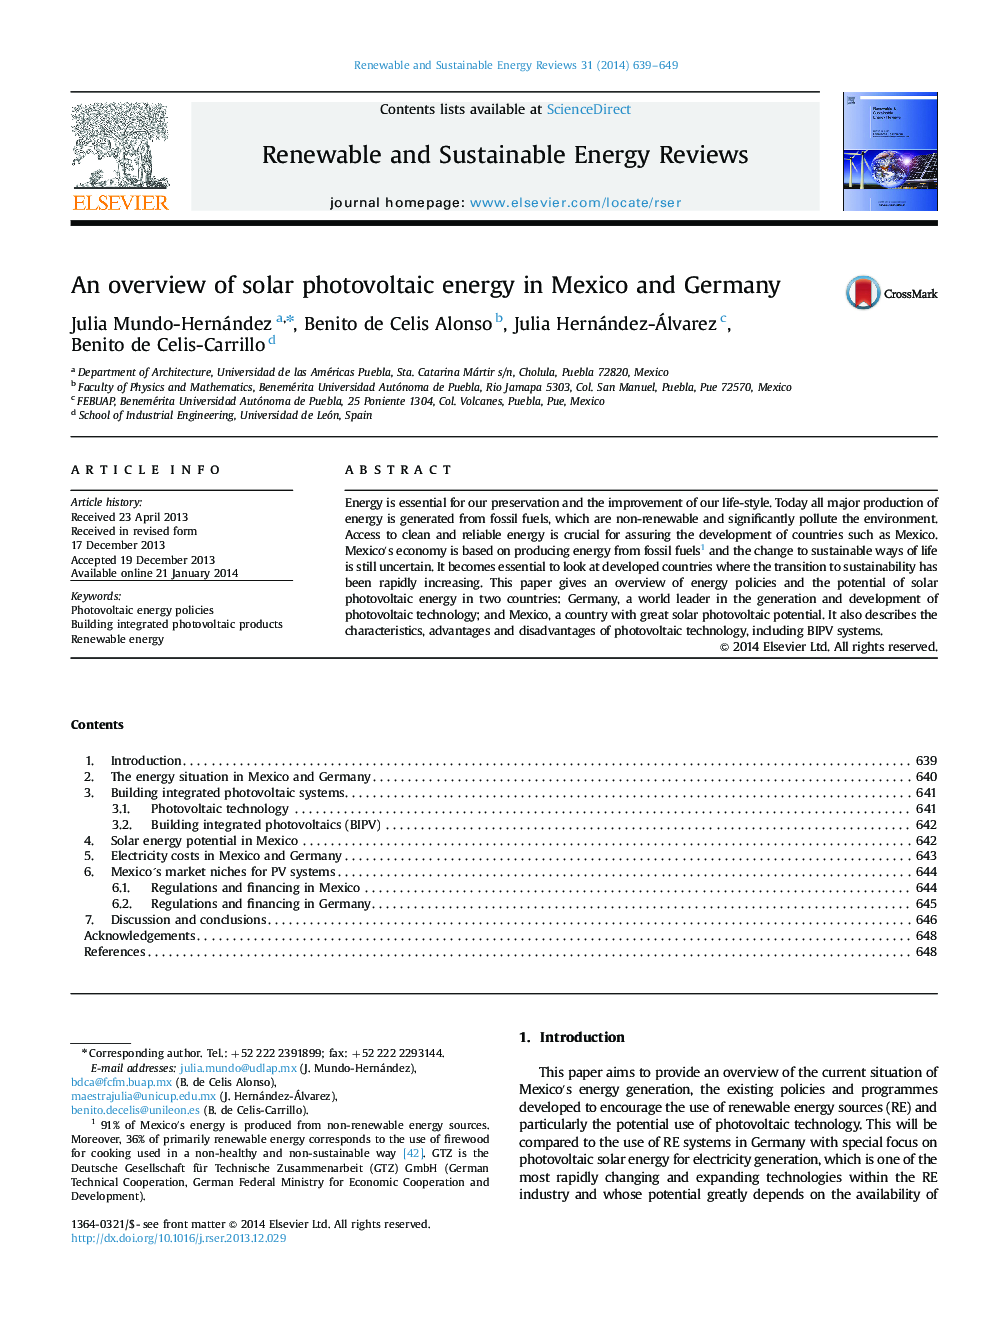 An overview of solar photovoltaic energy in Mexico and Germany